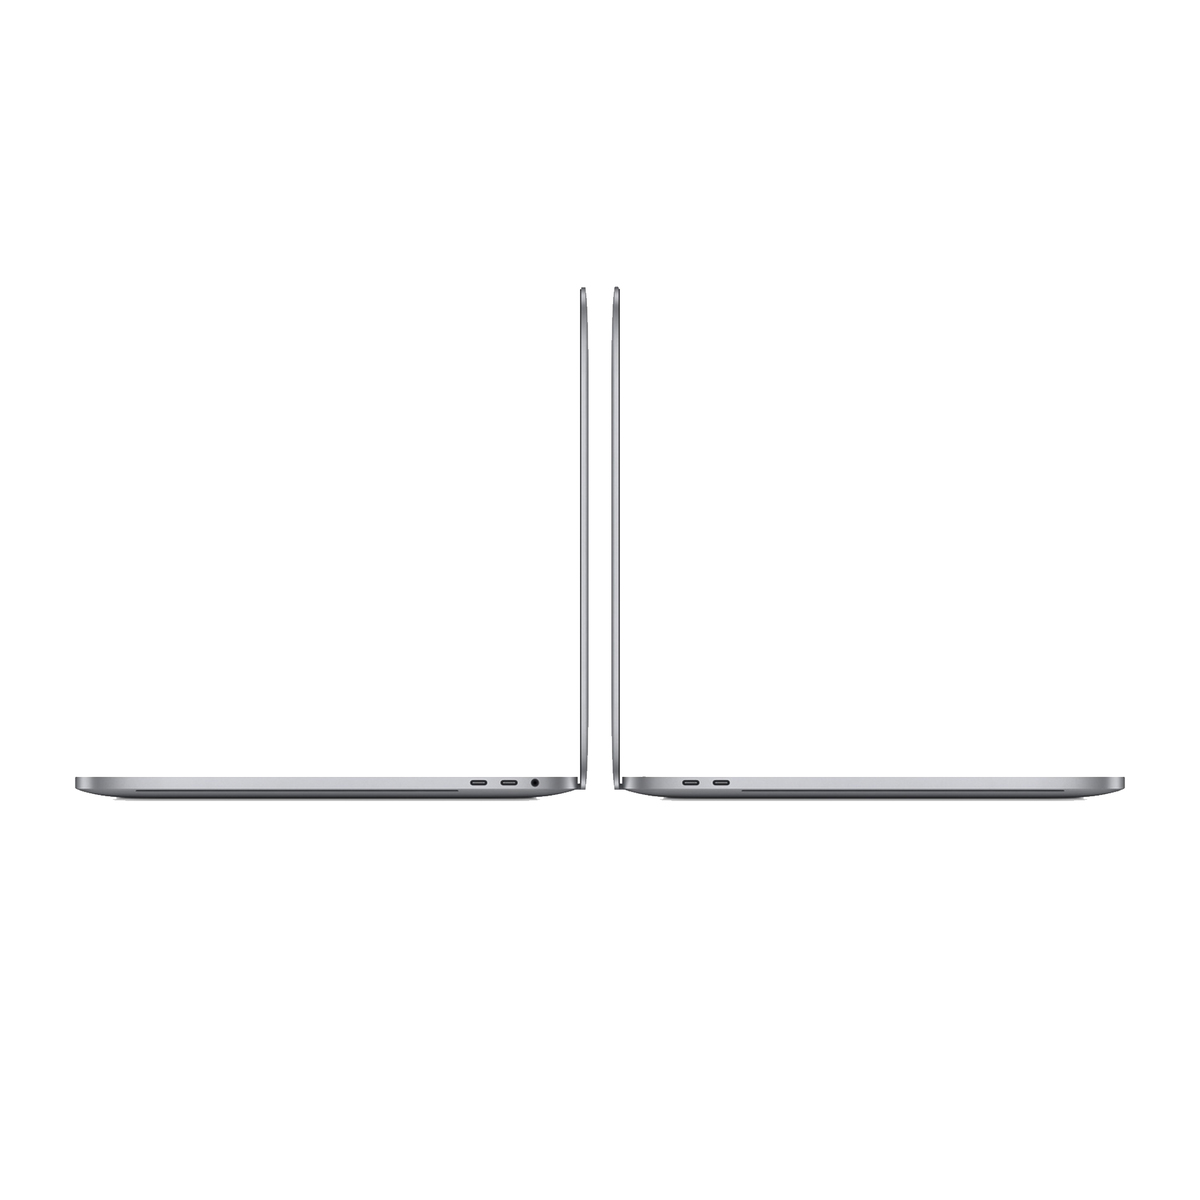 MacBook Pro Touch Bar With  16-inch LED-backlit Display, Core i9 Processor,2.3GHz 8-core,16GB RAM/1TB SSD,AMD Radeon Pro 5500M with 4GB of GDDR6 memory,Space Grey (MVVK2AB/A)